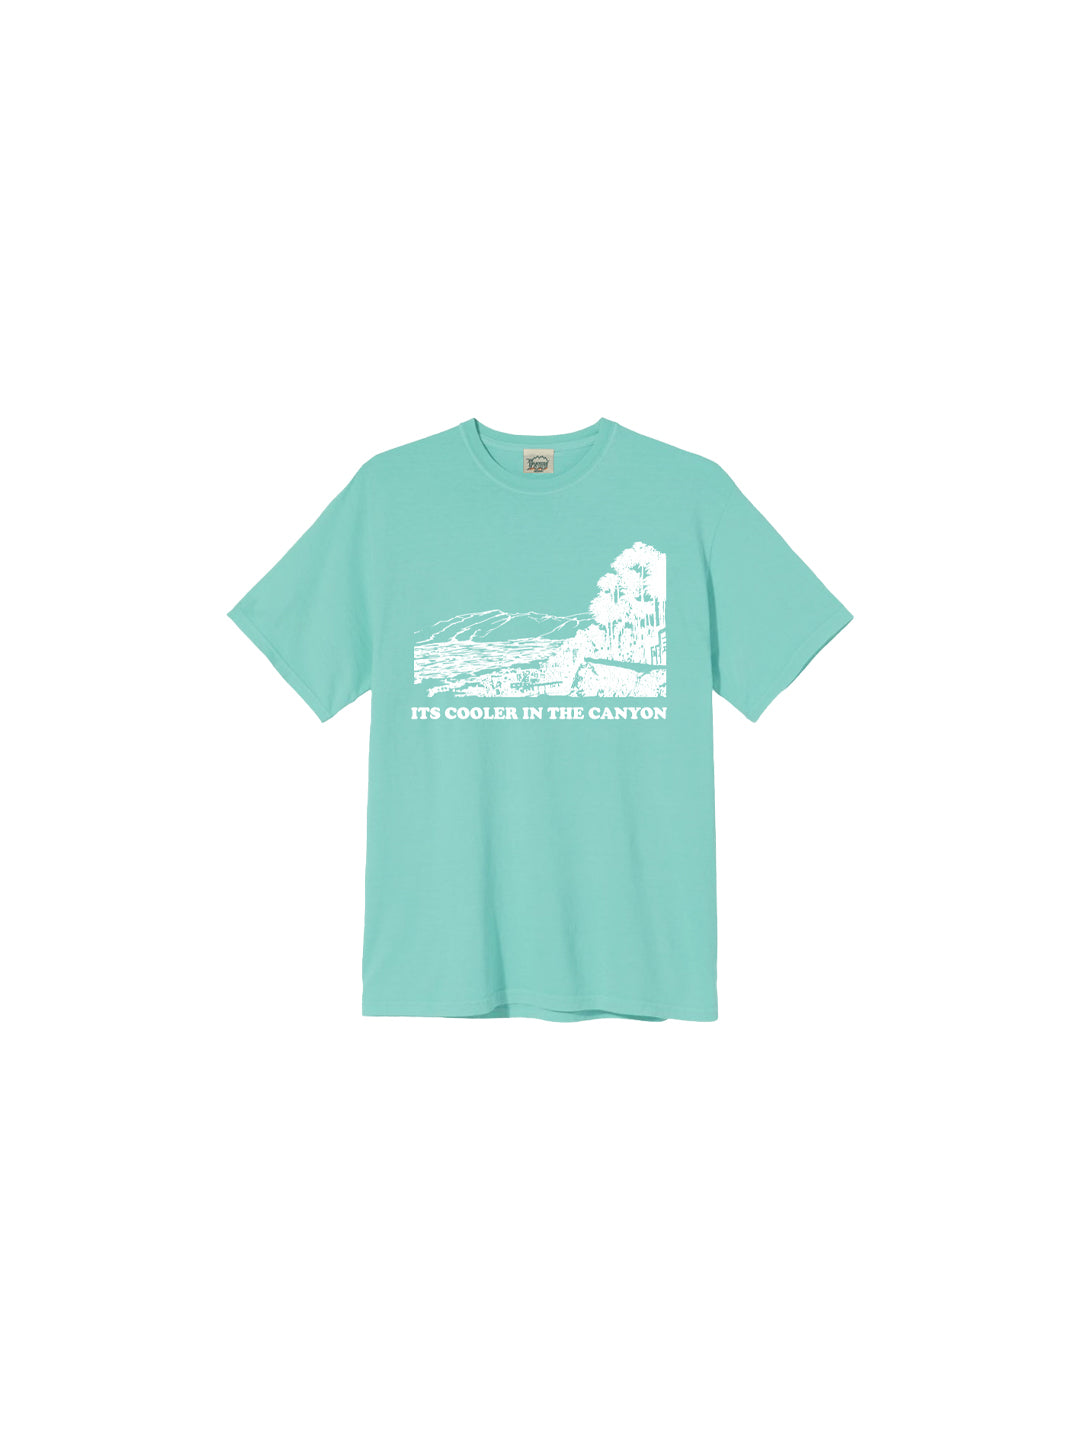 Cooler in the Canyon Youth Tee in Mint